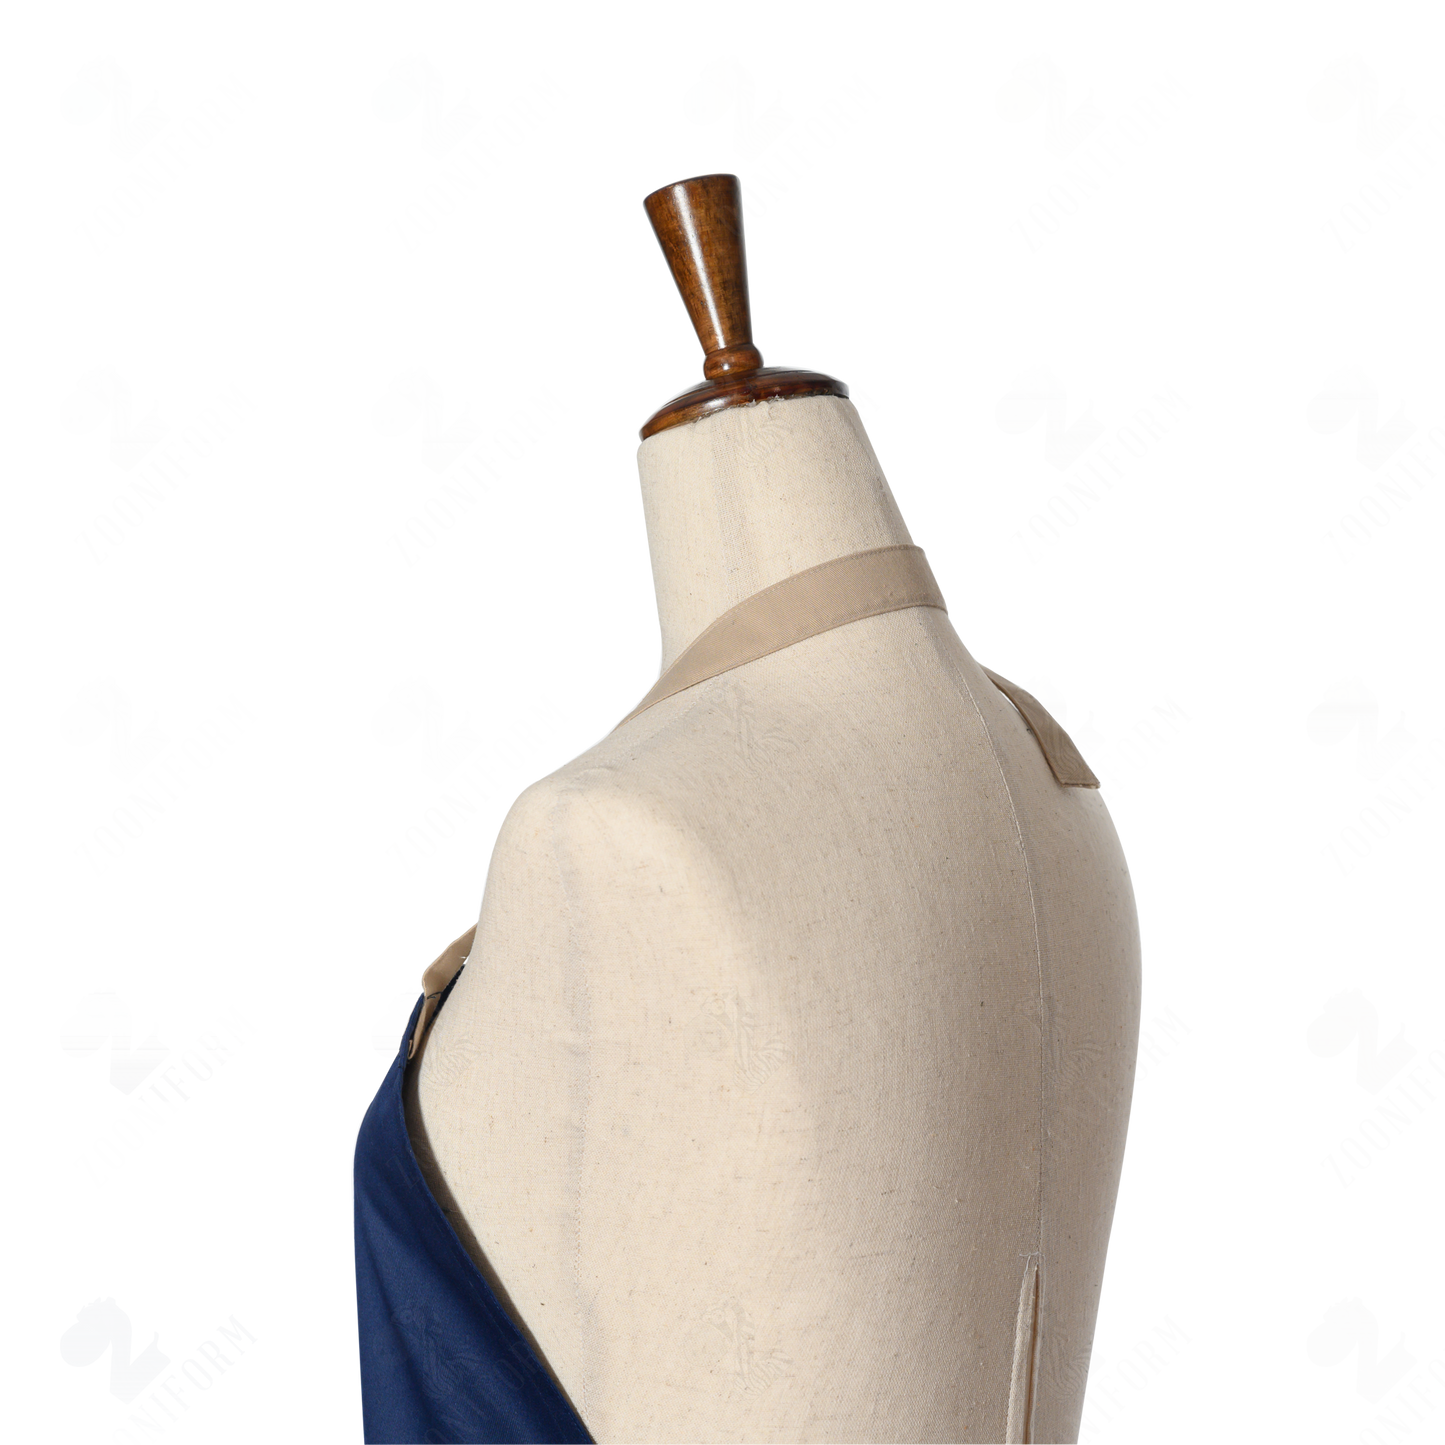 Two-tone Blue & Beige Cotton Bib Apron with Two Pockets